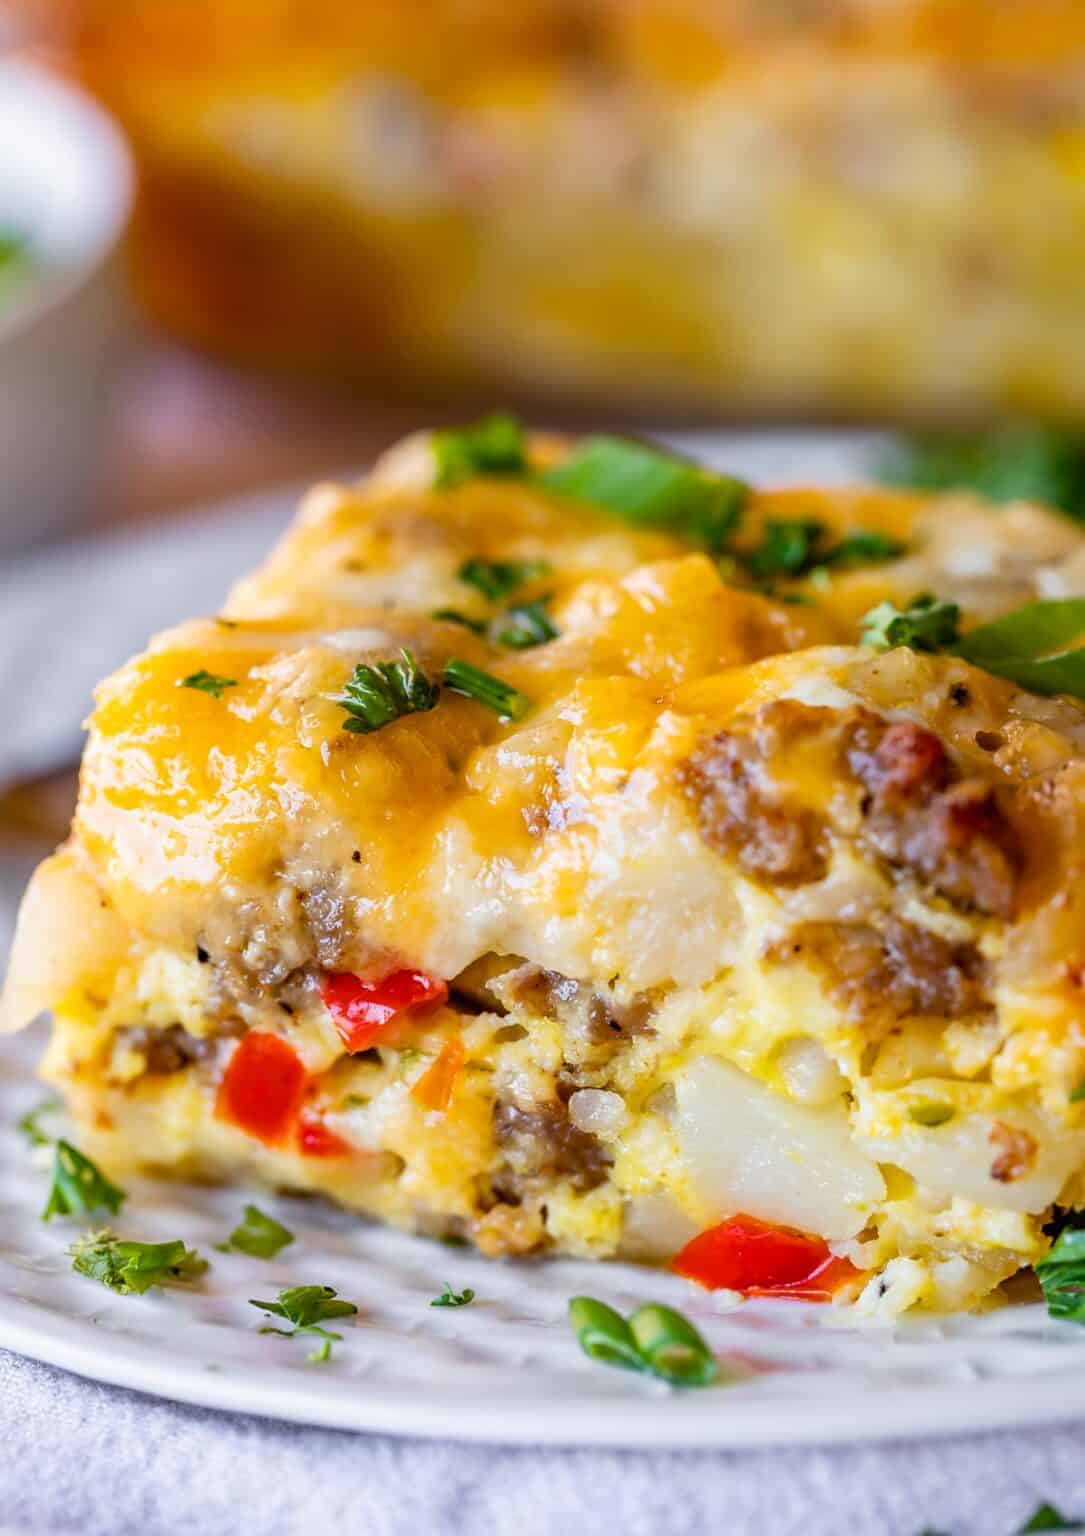 Easy Overnight Breakfast Casserole with Sausage - The Food Charlatan